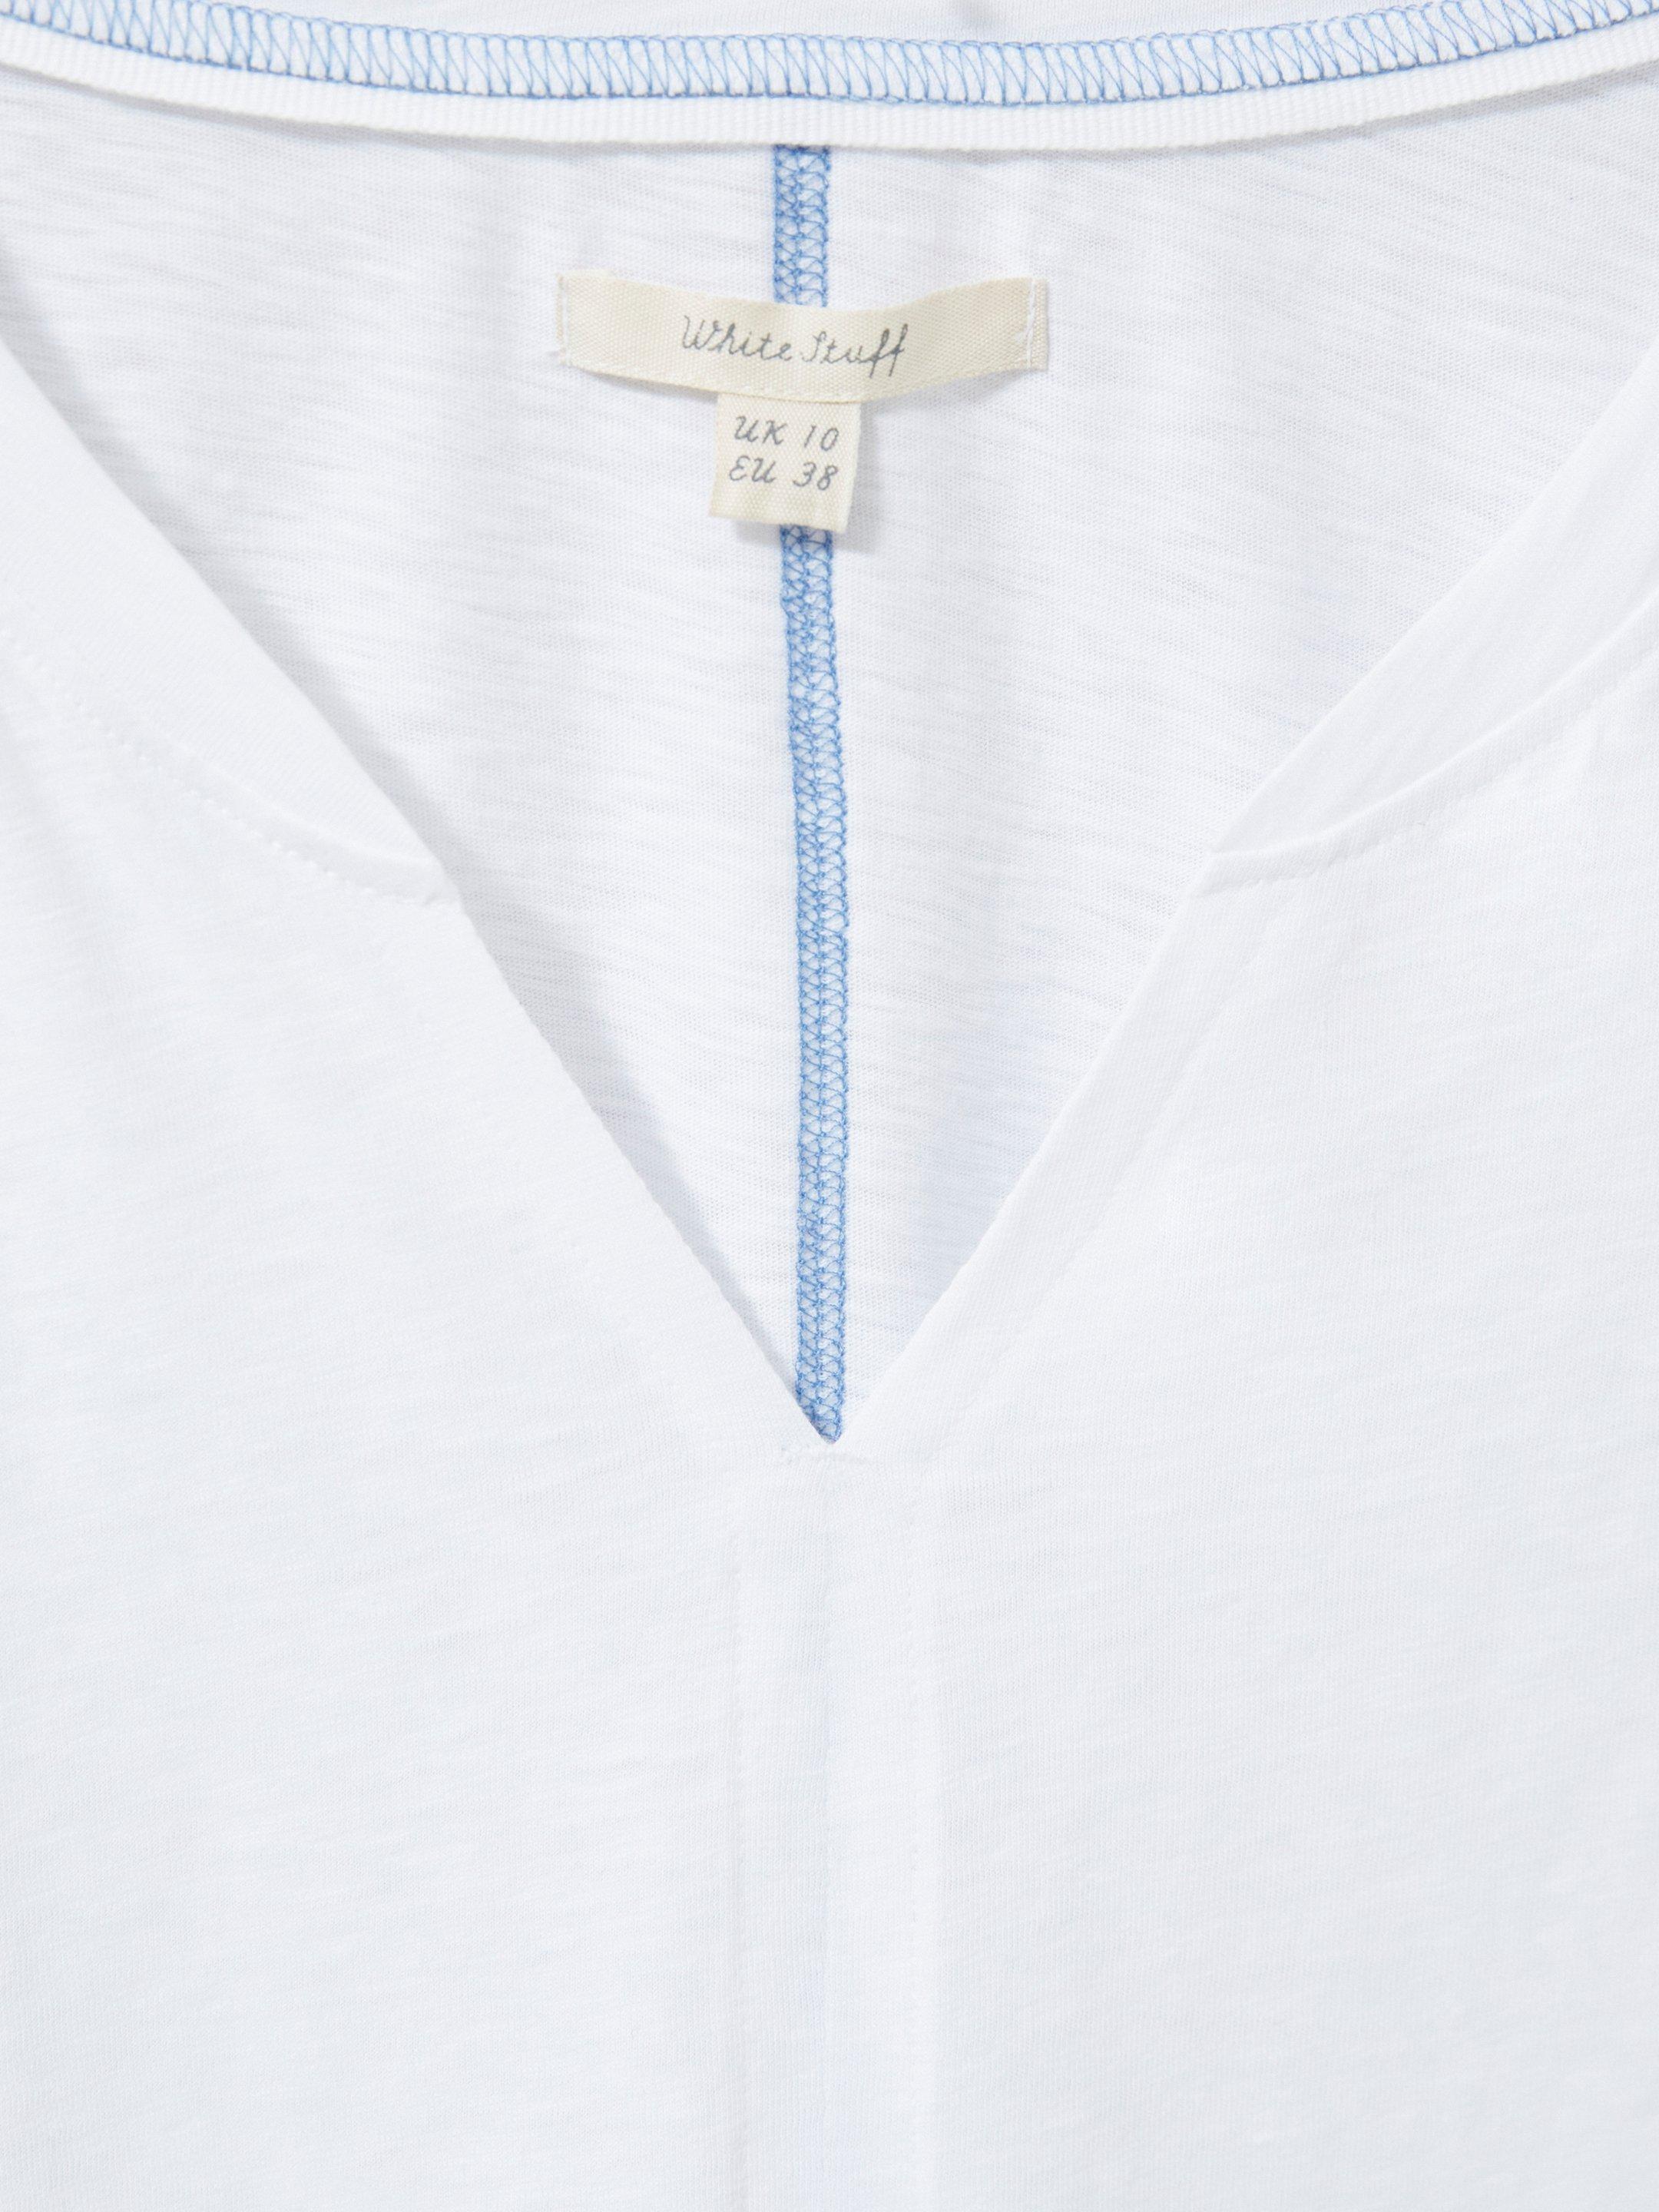 Nelly Notch Neck Tee in NAT WHITE - FLAT DETAIL